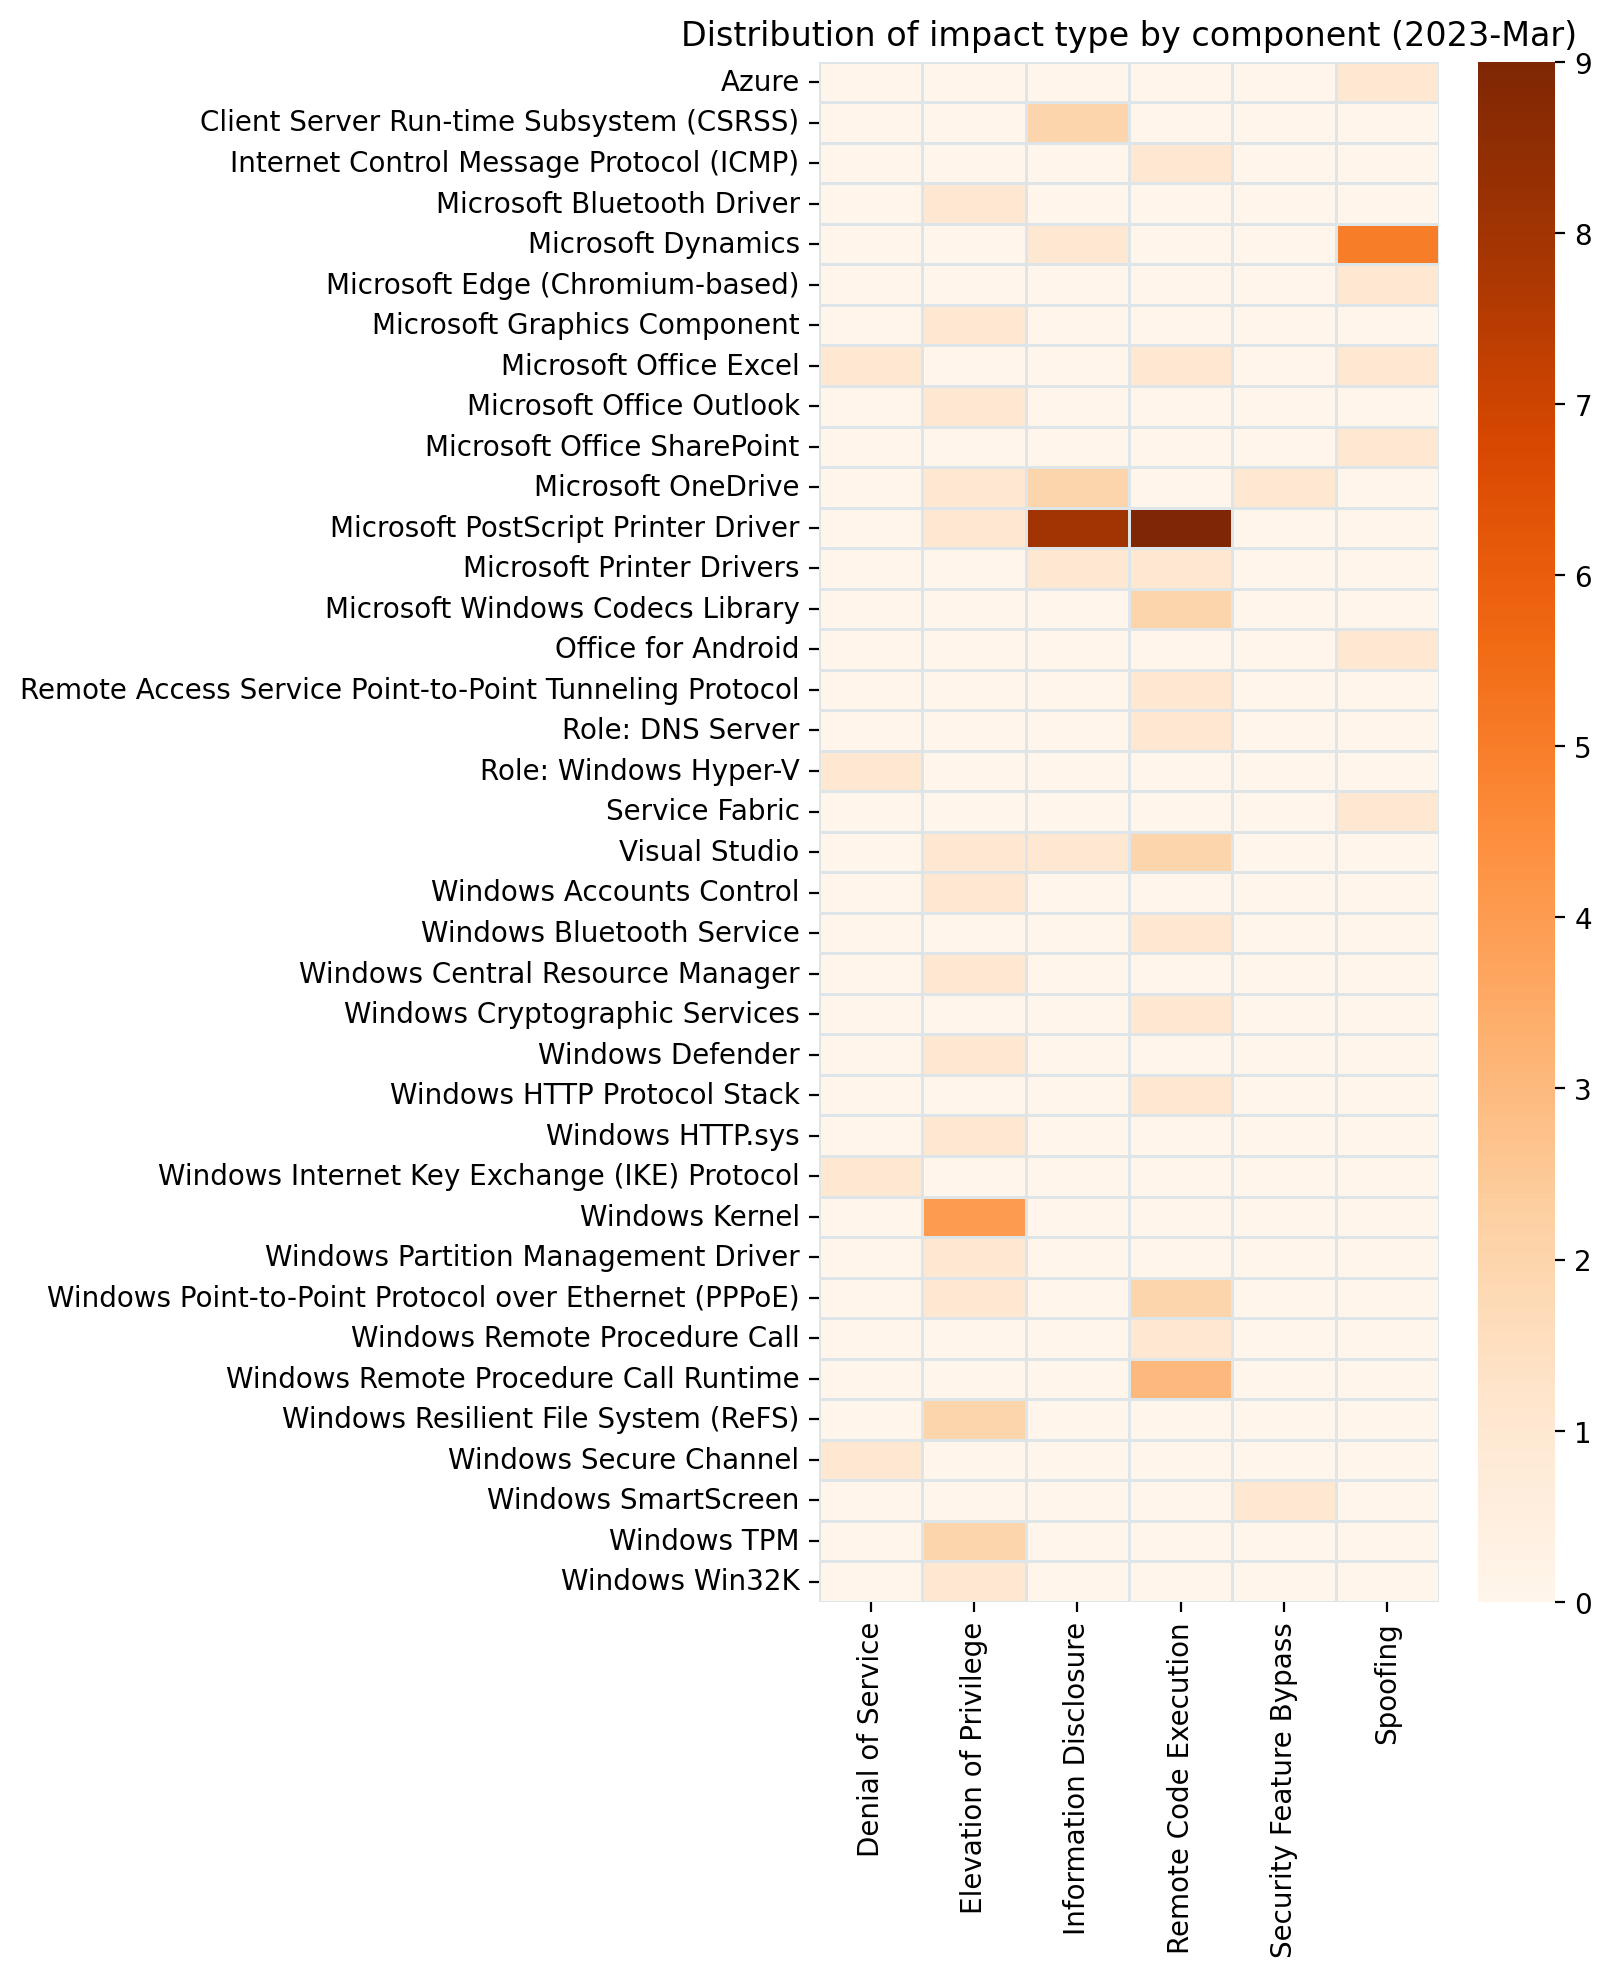 A heatmap showing vulnerability count by component and impact for Microsoft Path Tuesday March 2023. Printer drivers, Microsoft Dynamics, and the Windows Kernel stand out from the pack.